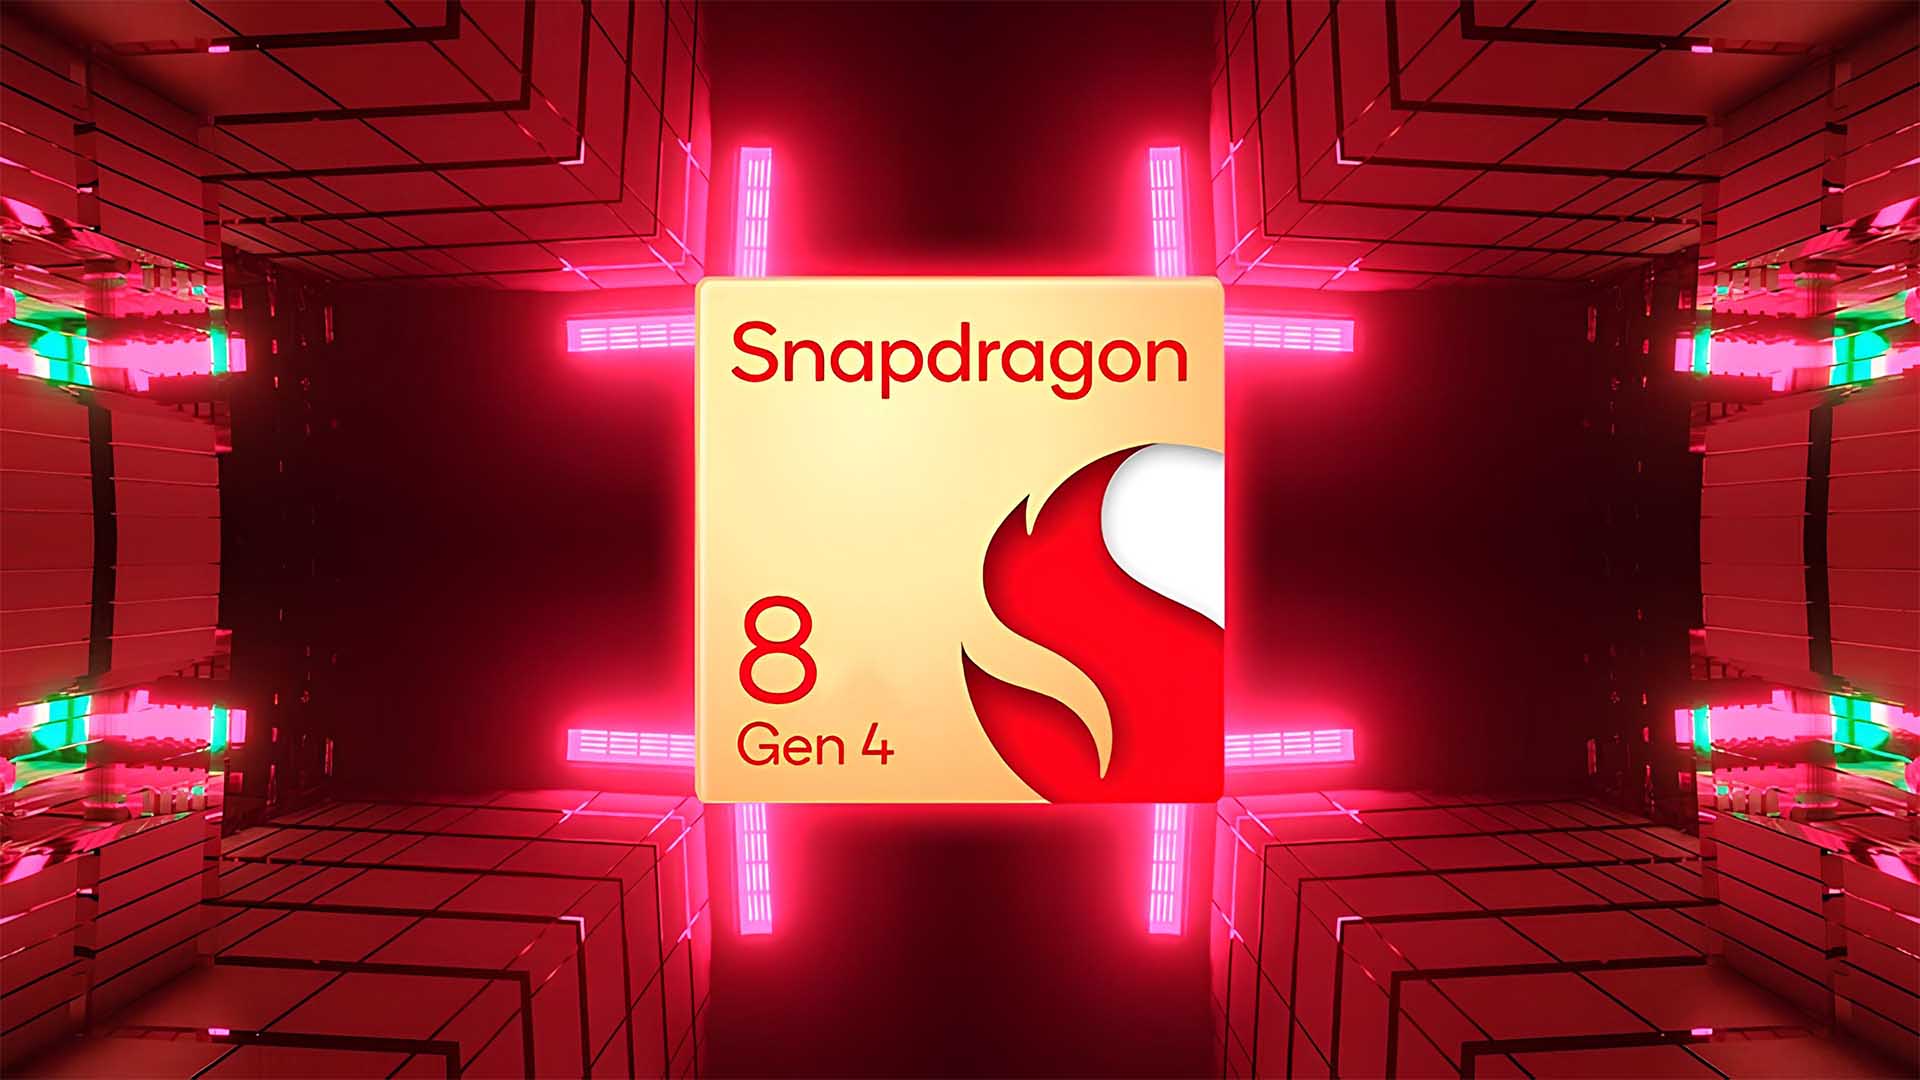 Xiaomi To Lead with First Use of Snapdragon 8 Gen 4 Chip in Upcoming Smartphones